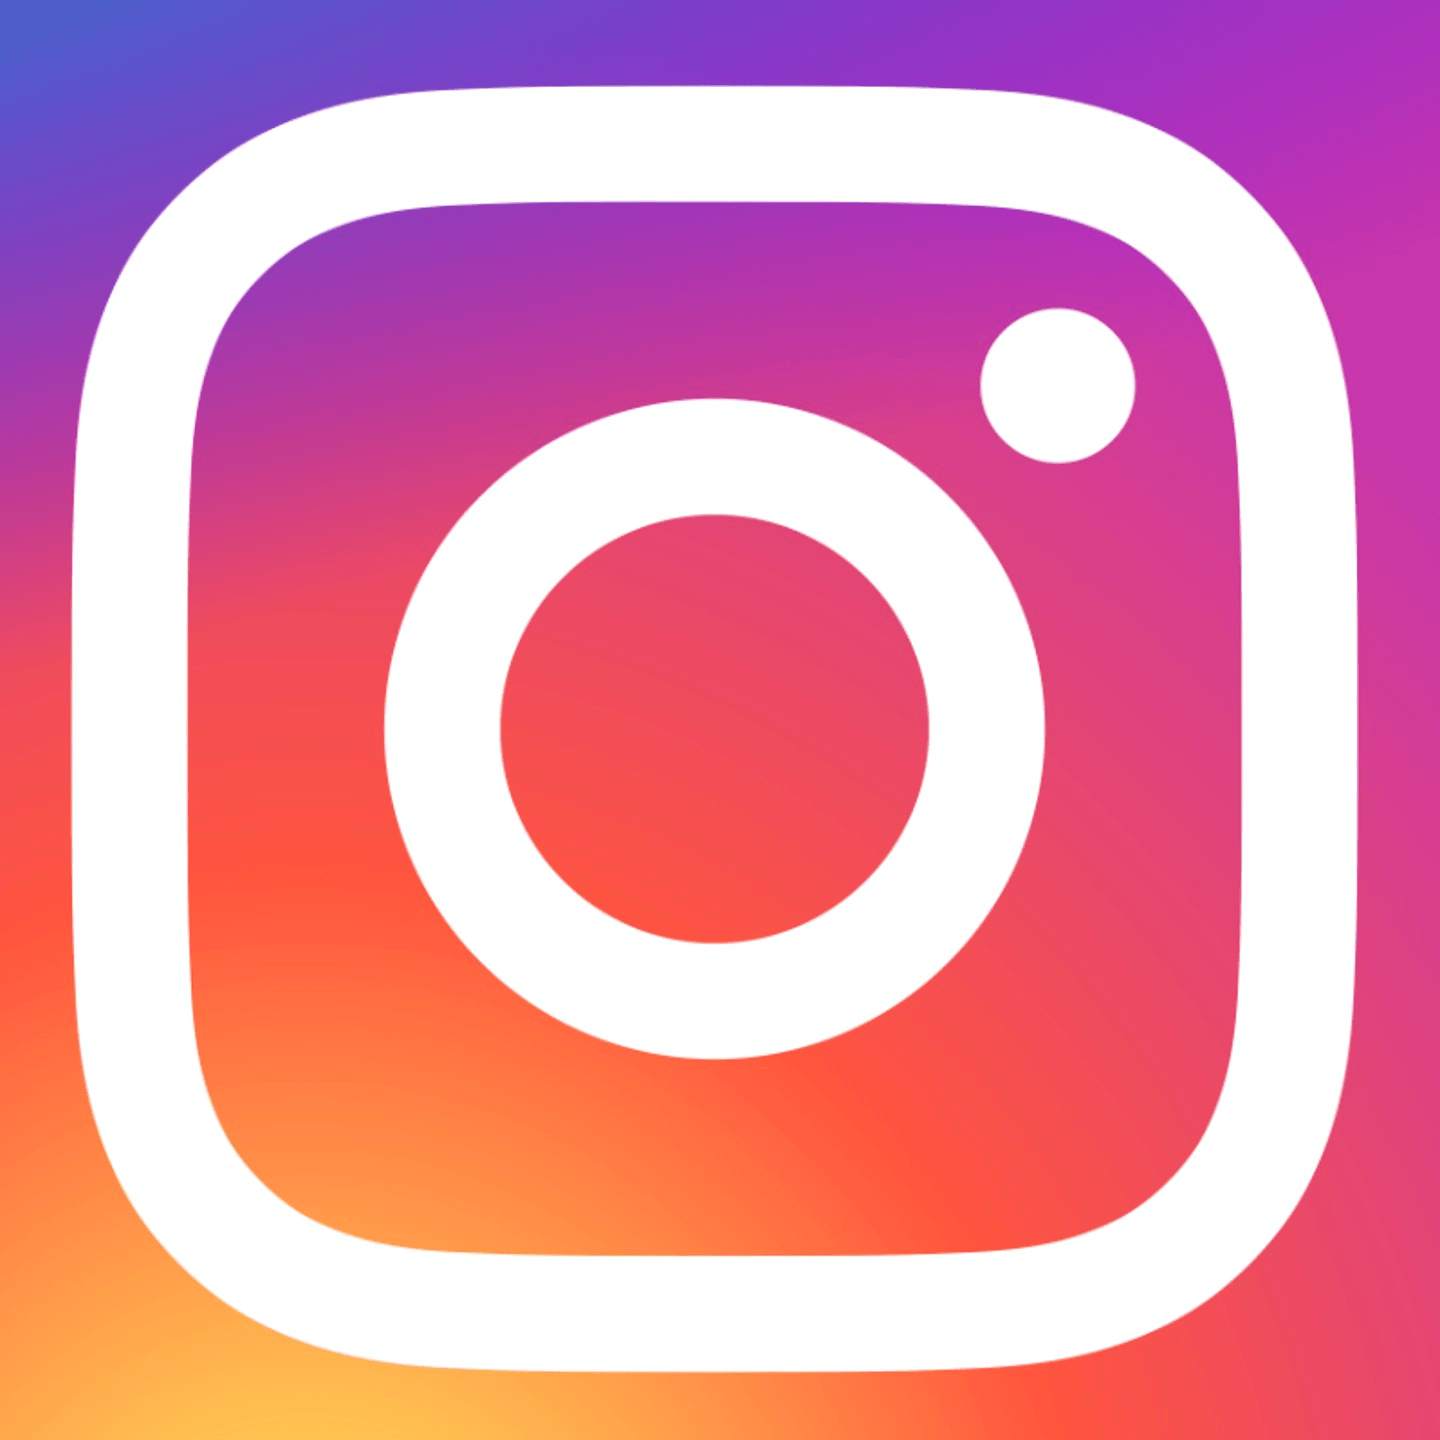 ¡Don't forget to follow us on Instagram!